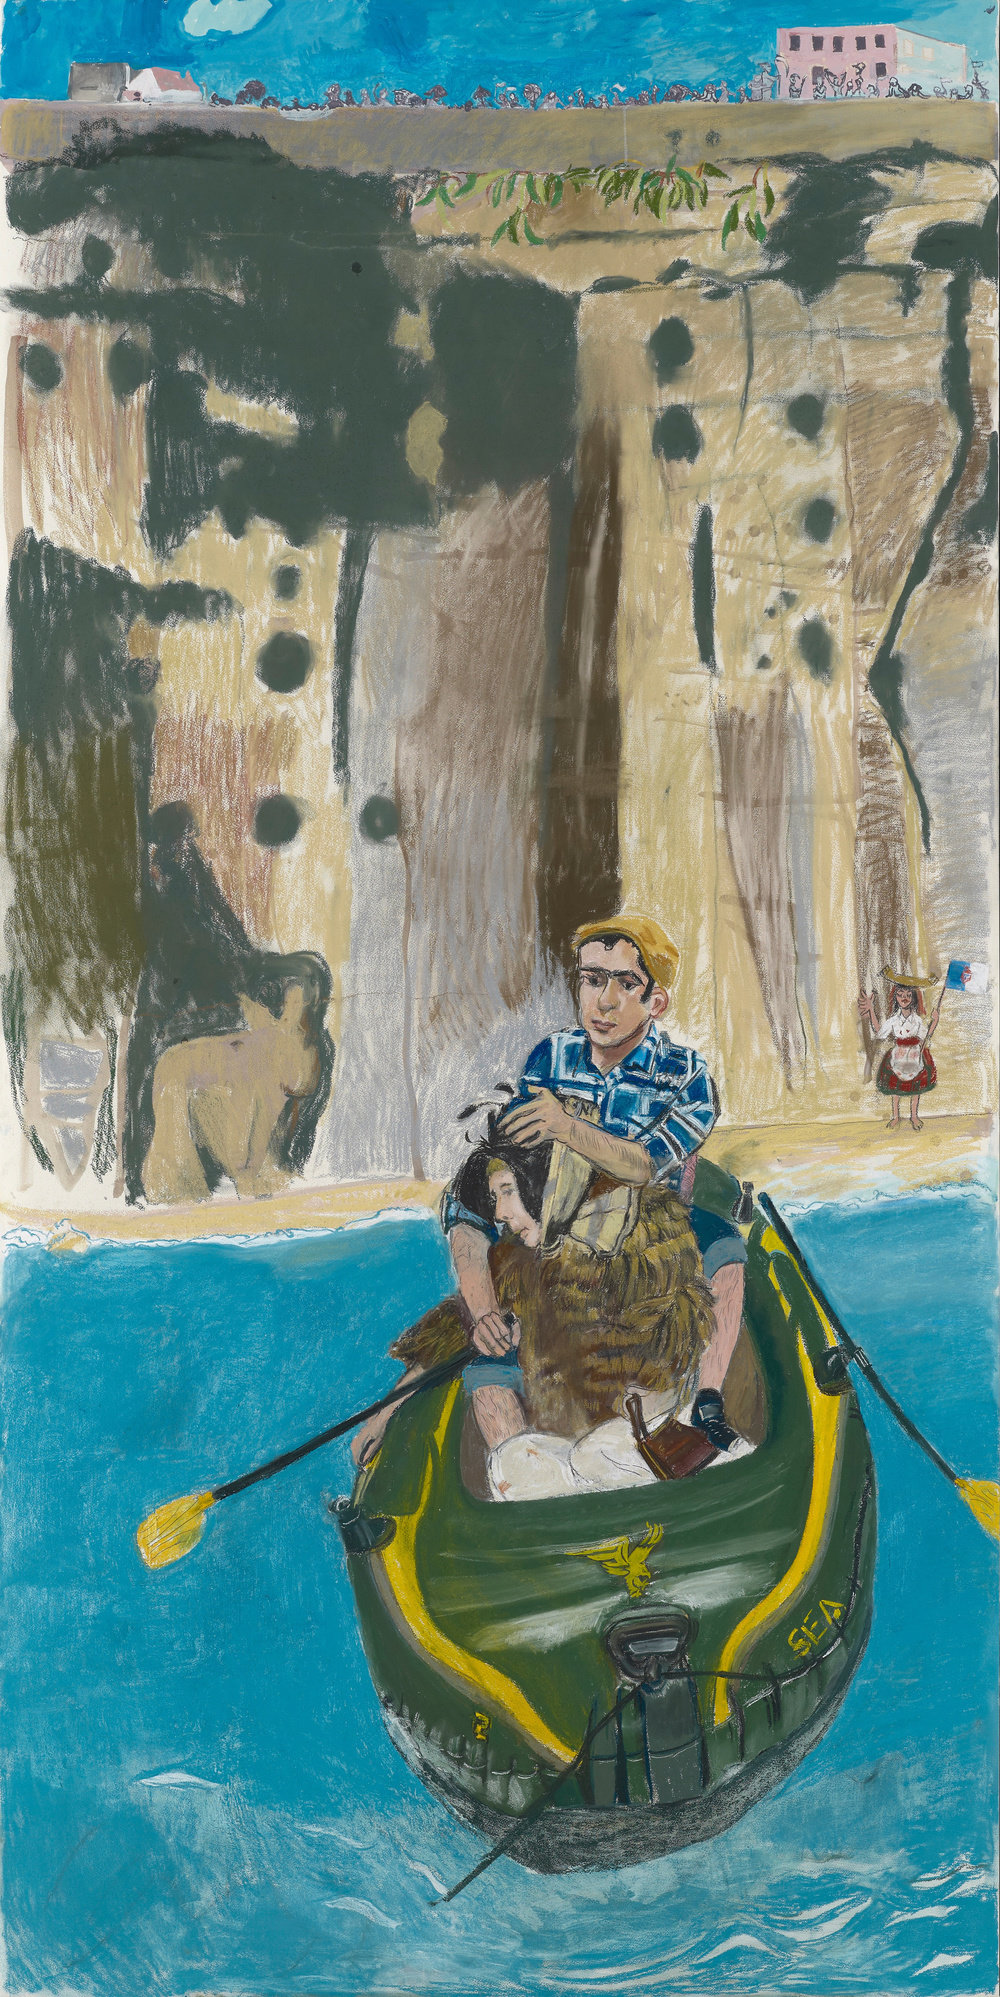 Rego, rowing from ericeira, 2014, pastel on paper, 94 ½ x 47 18 in., 240 x 120.2cm., 94 1 2 x 47 18 in.